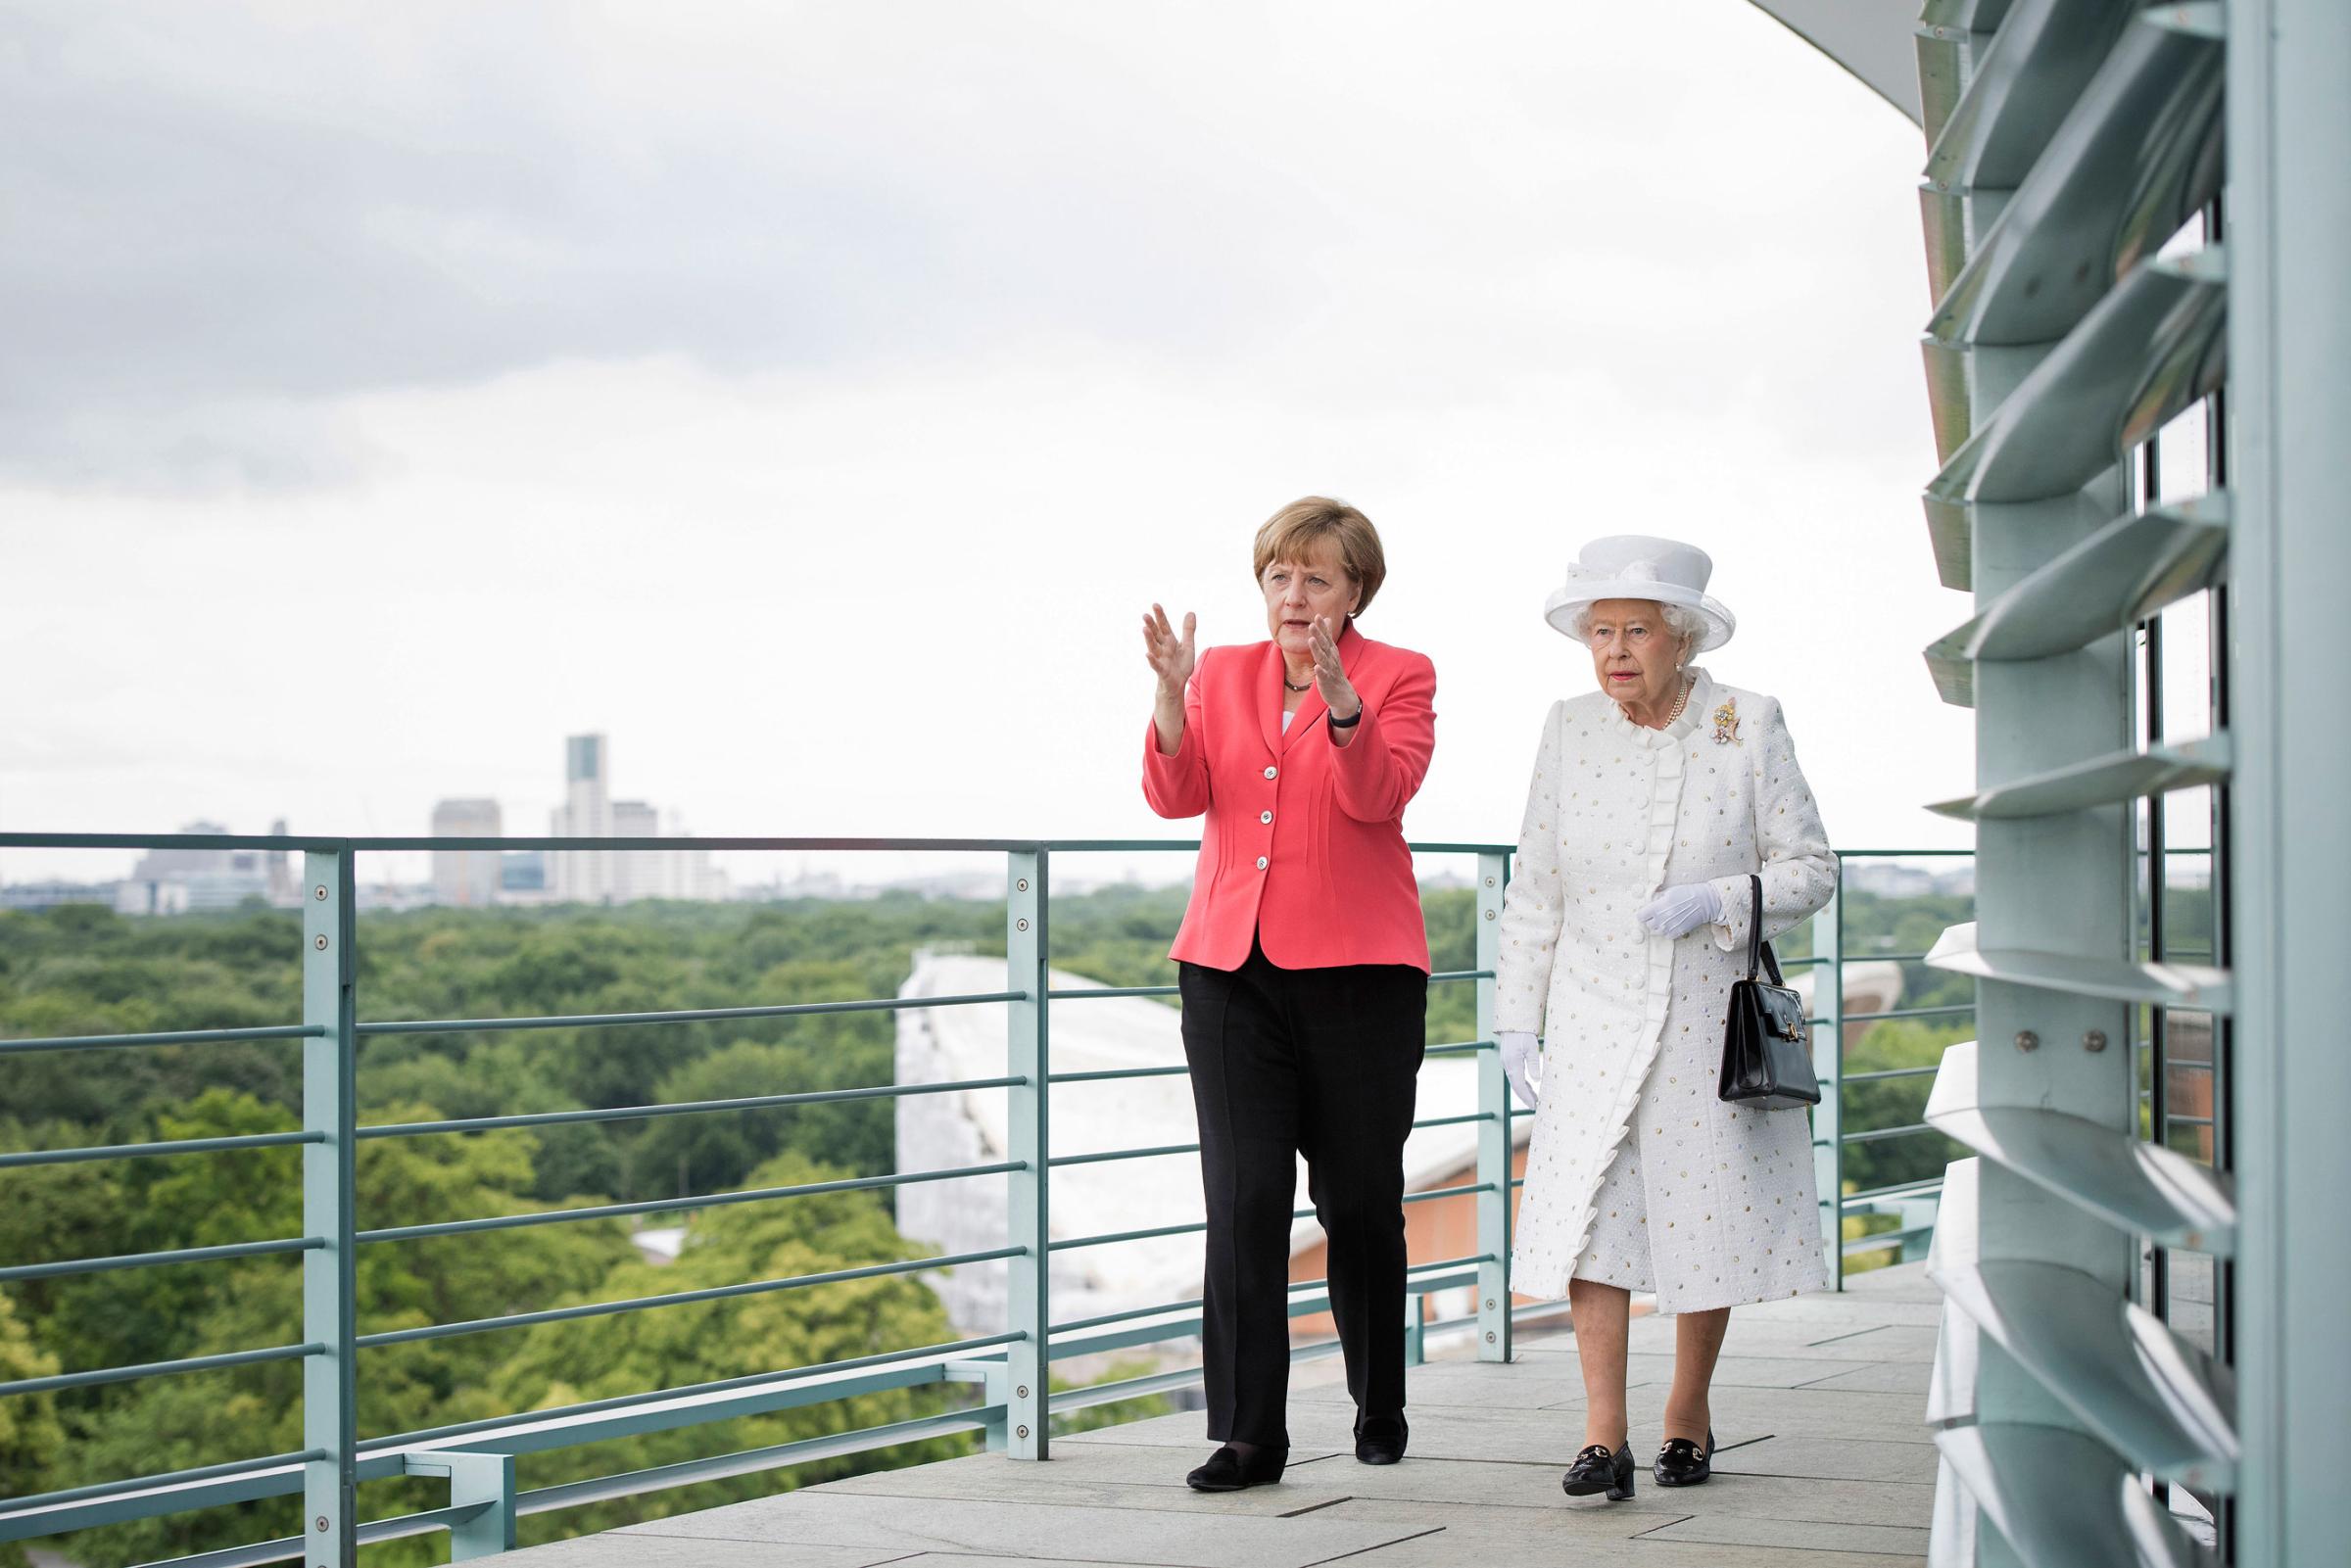 Angela Merkel welcomes Queen Elizabeth II upon her arrival at the Federal Chancellery on the second of the royal couple's four-day visit to Germany on June 24, 2015 in Berlin.